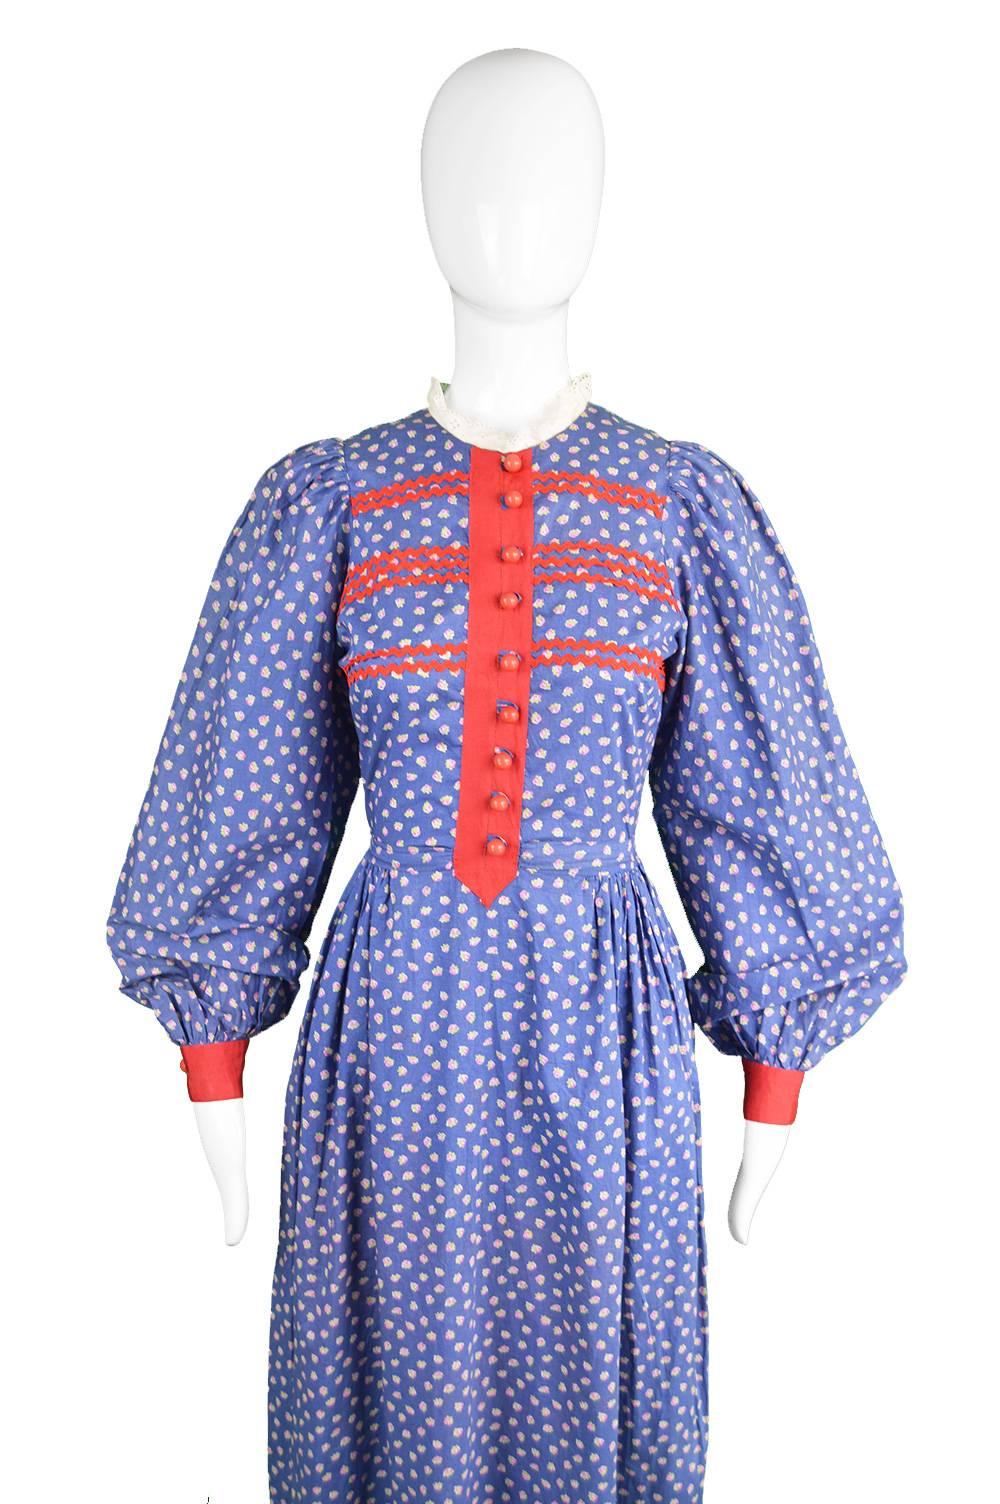 Purple Mary Quant Blue & Red Peasant Dress with Ditsy Floral Print, 1970s